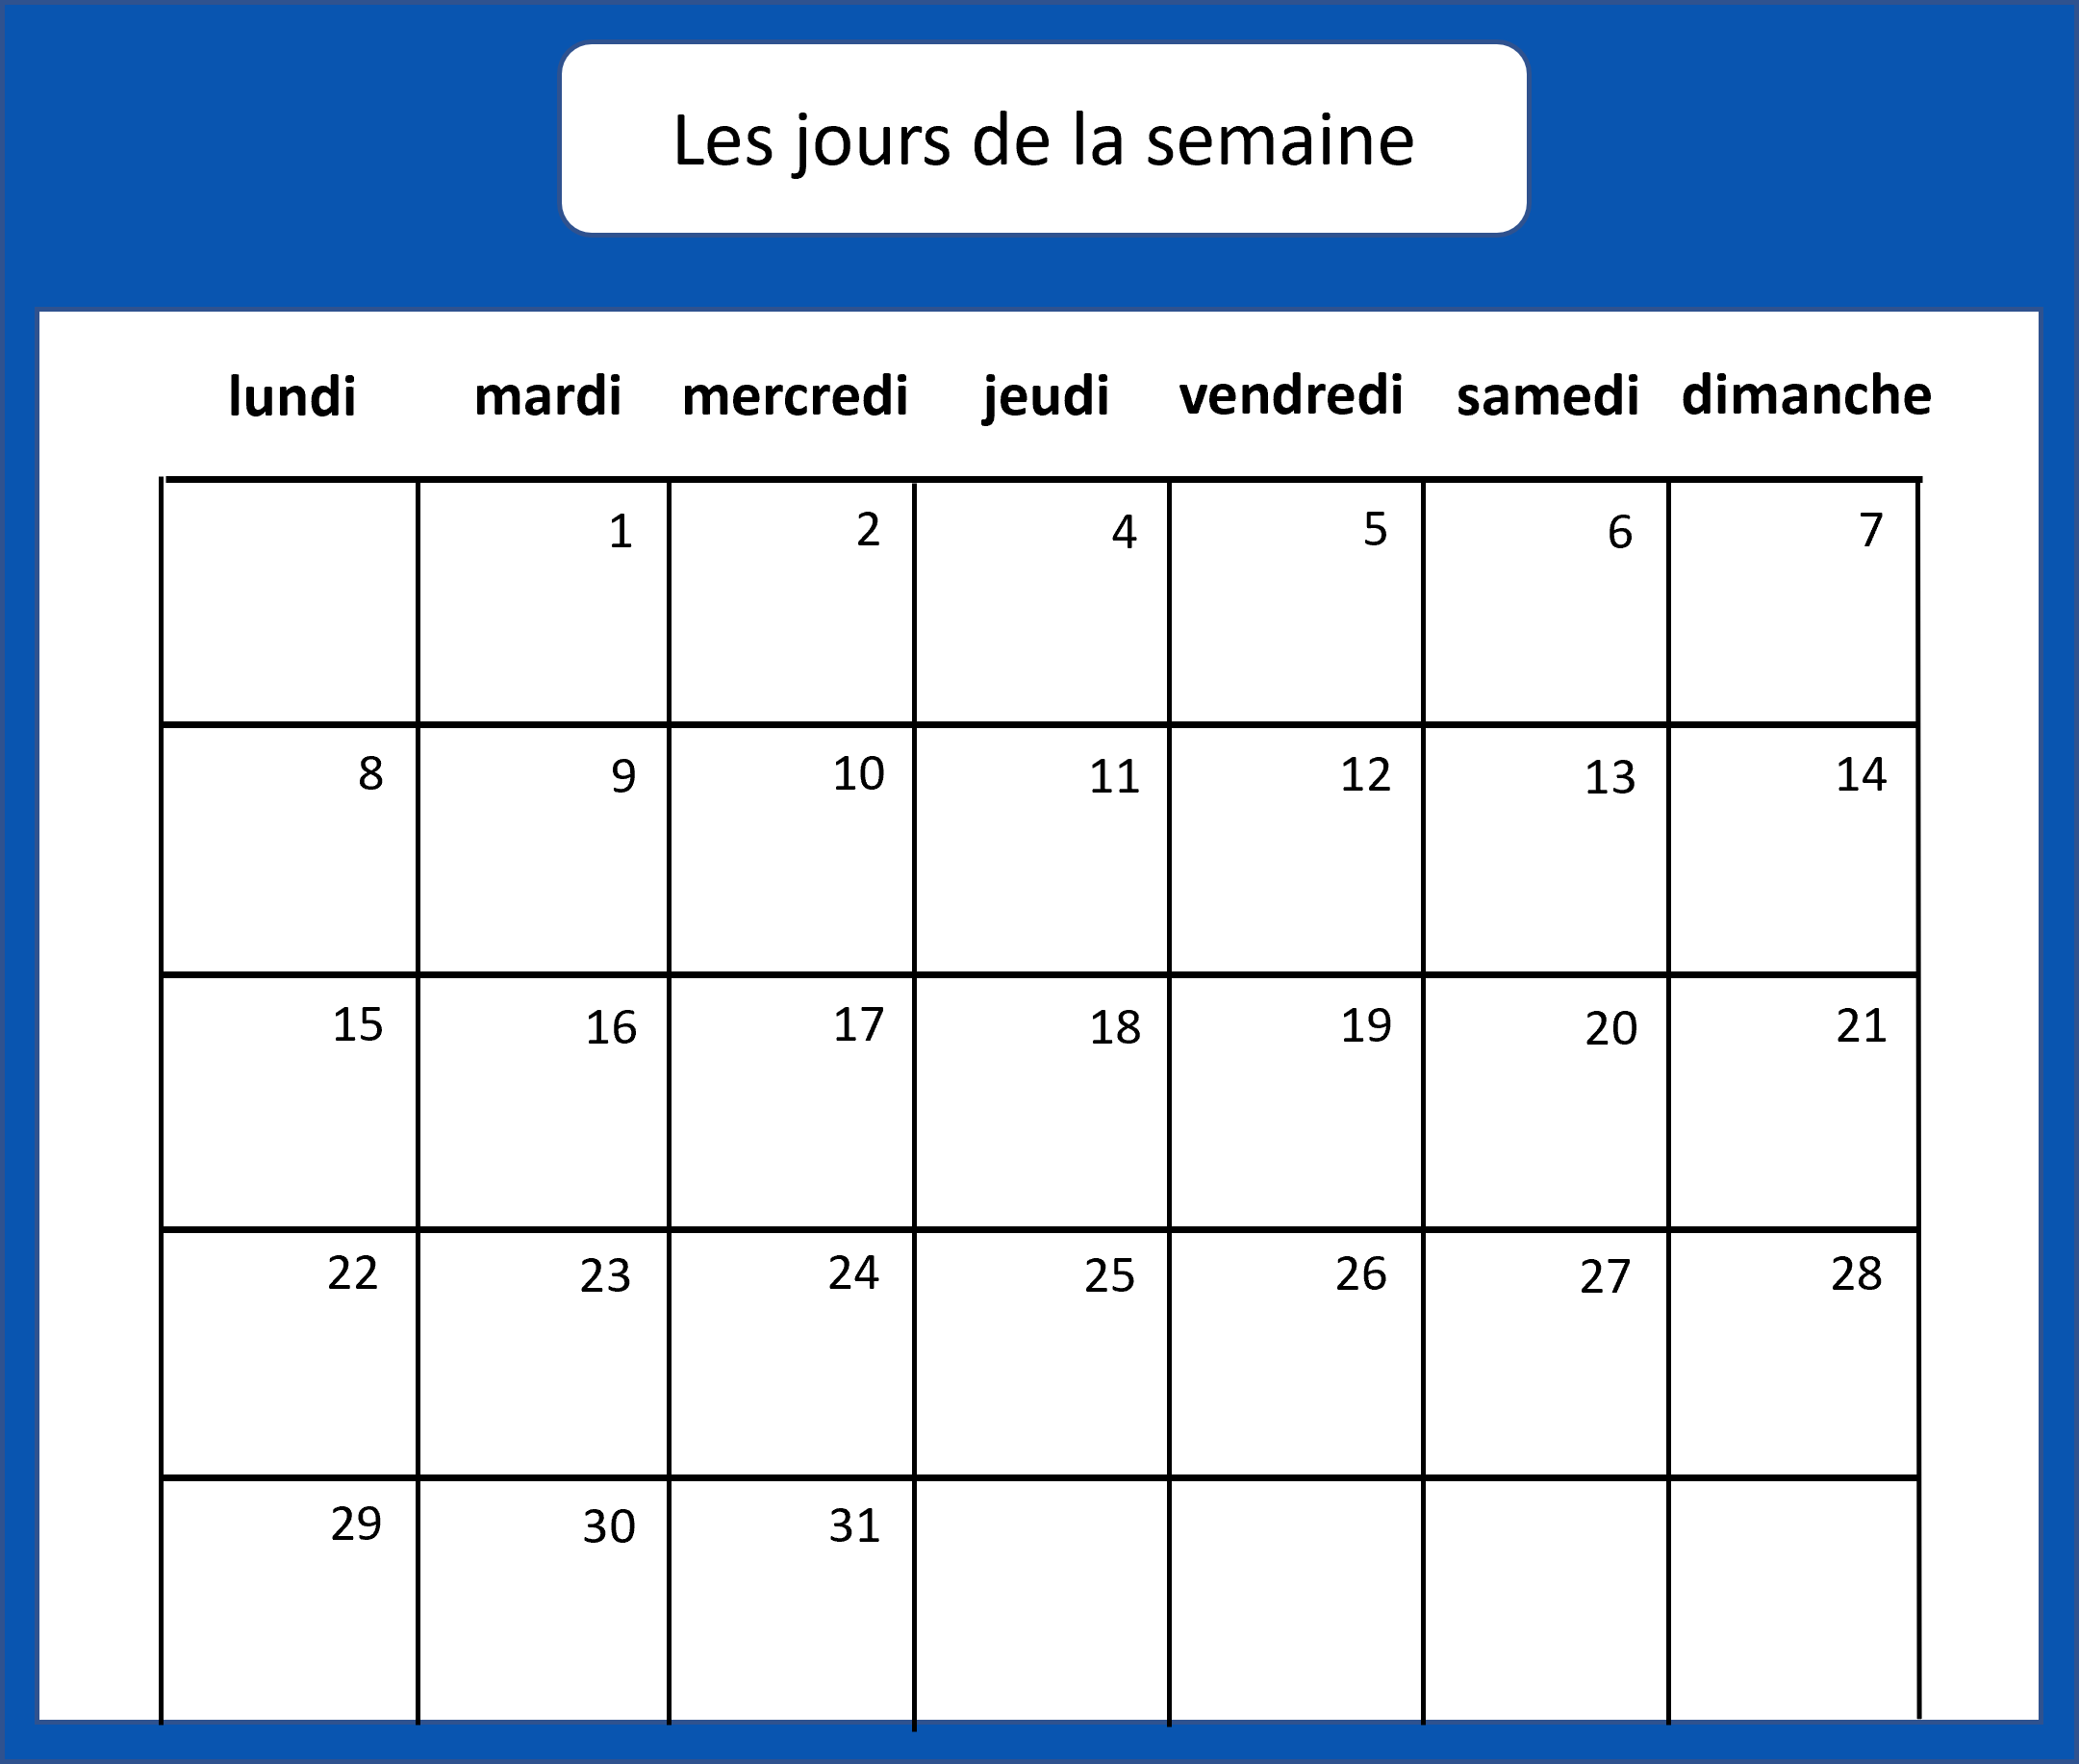 A calendar showing the days of the week in French.